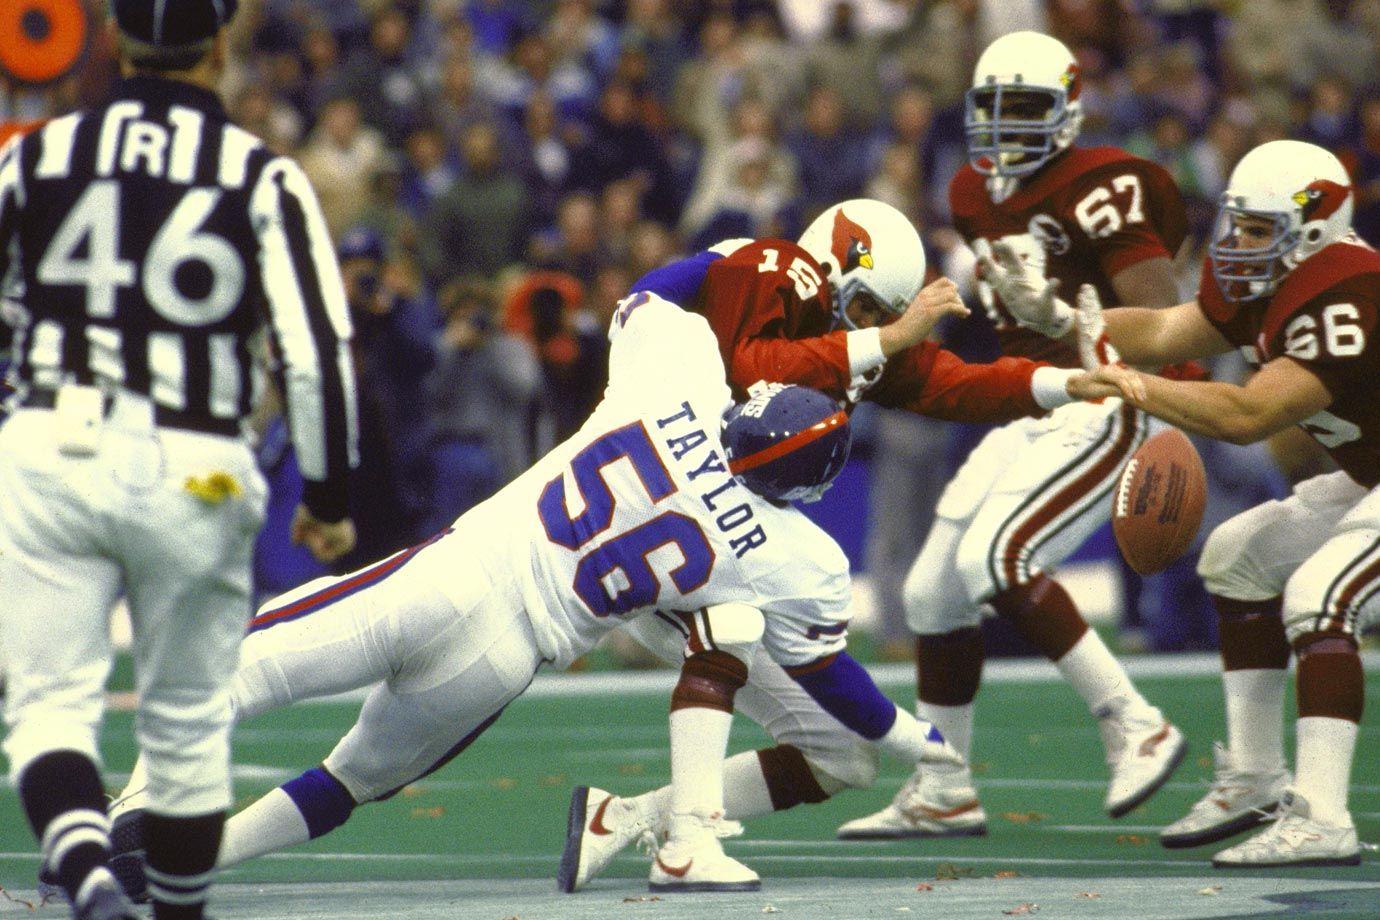 Classic SI Photo of Lawrence Taylor